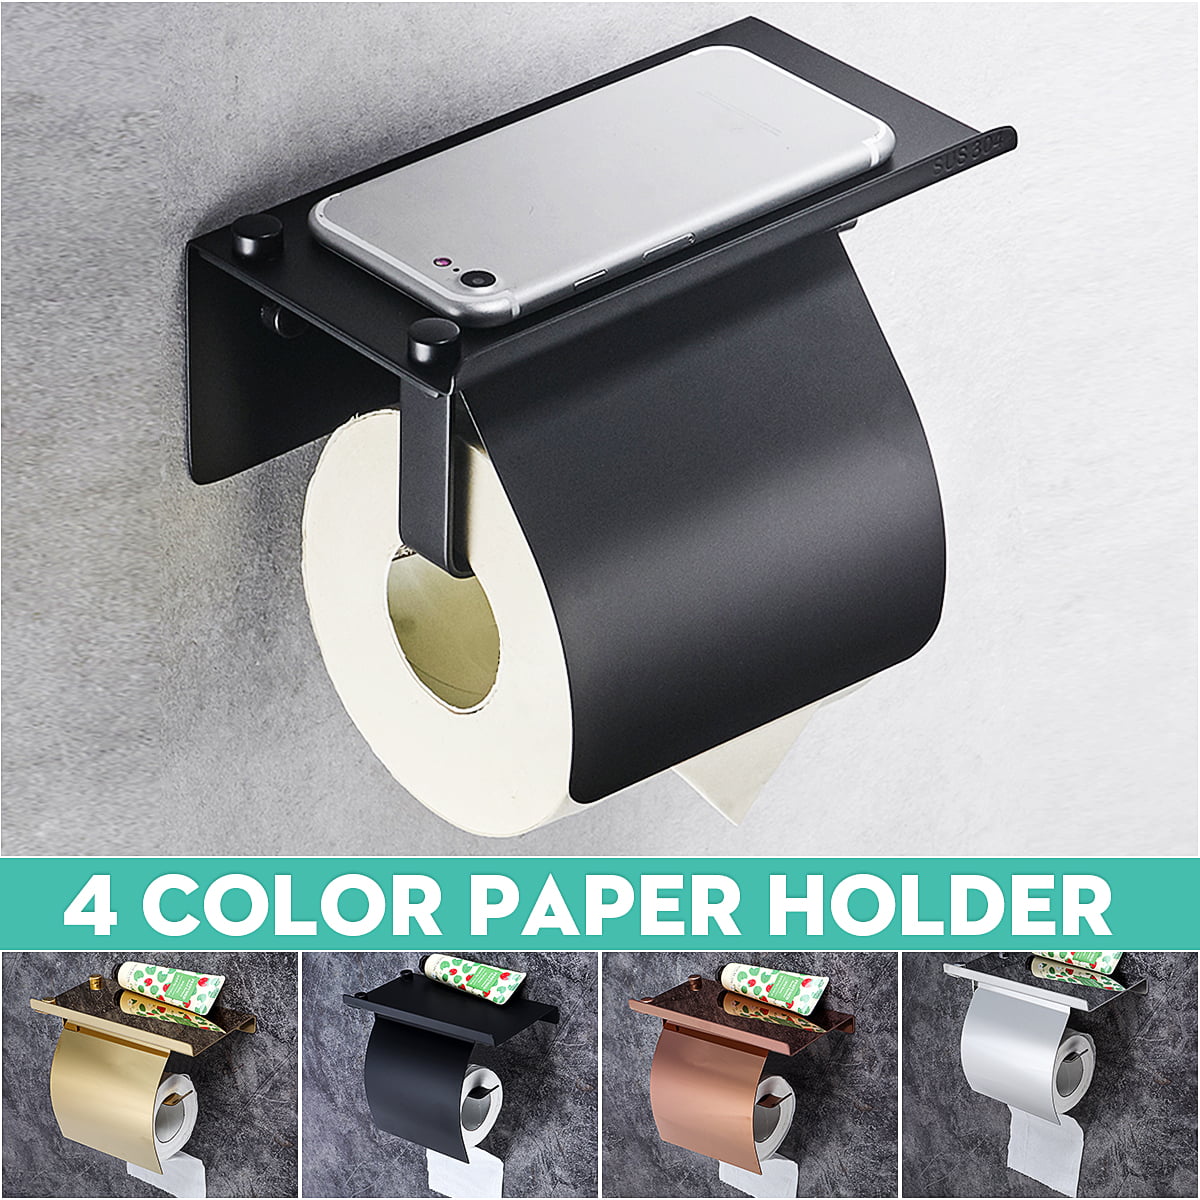 Toilet Paper Holder Stand Free Standing Toilet Paper Holder Black with 4 Raised Feet for Bathroom Storage F-color 2 Packs Toilet Paper Roll Holder Stand with Shelf 